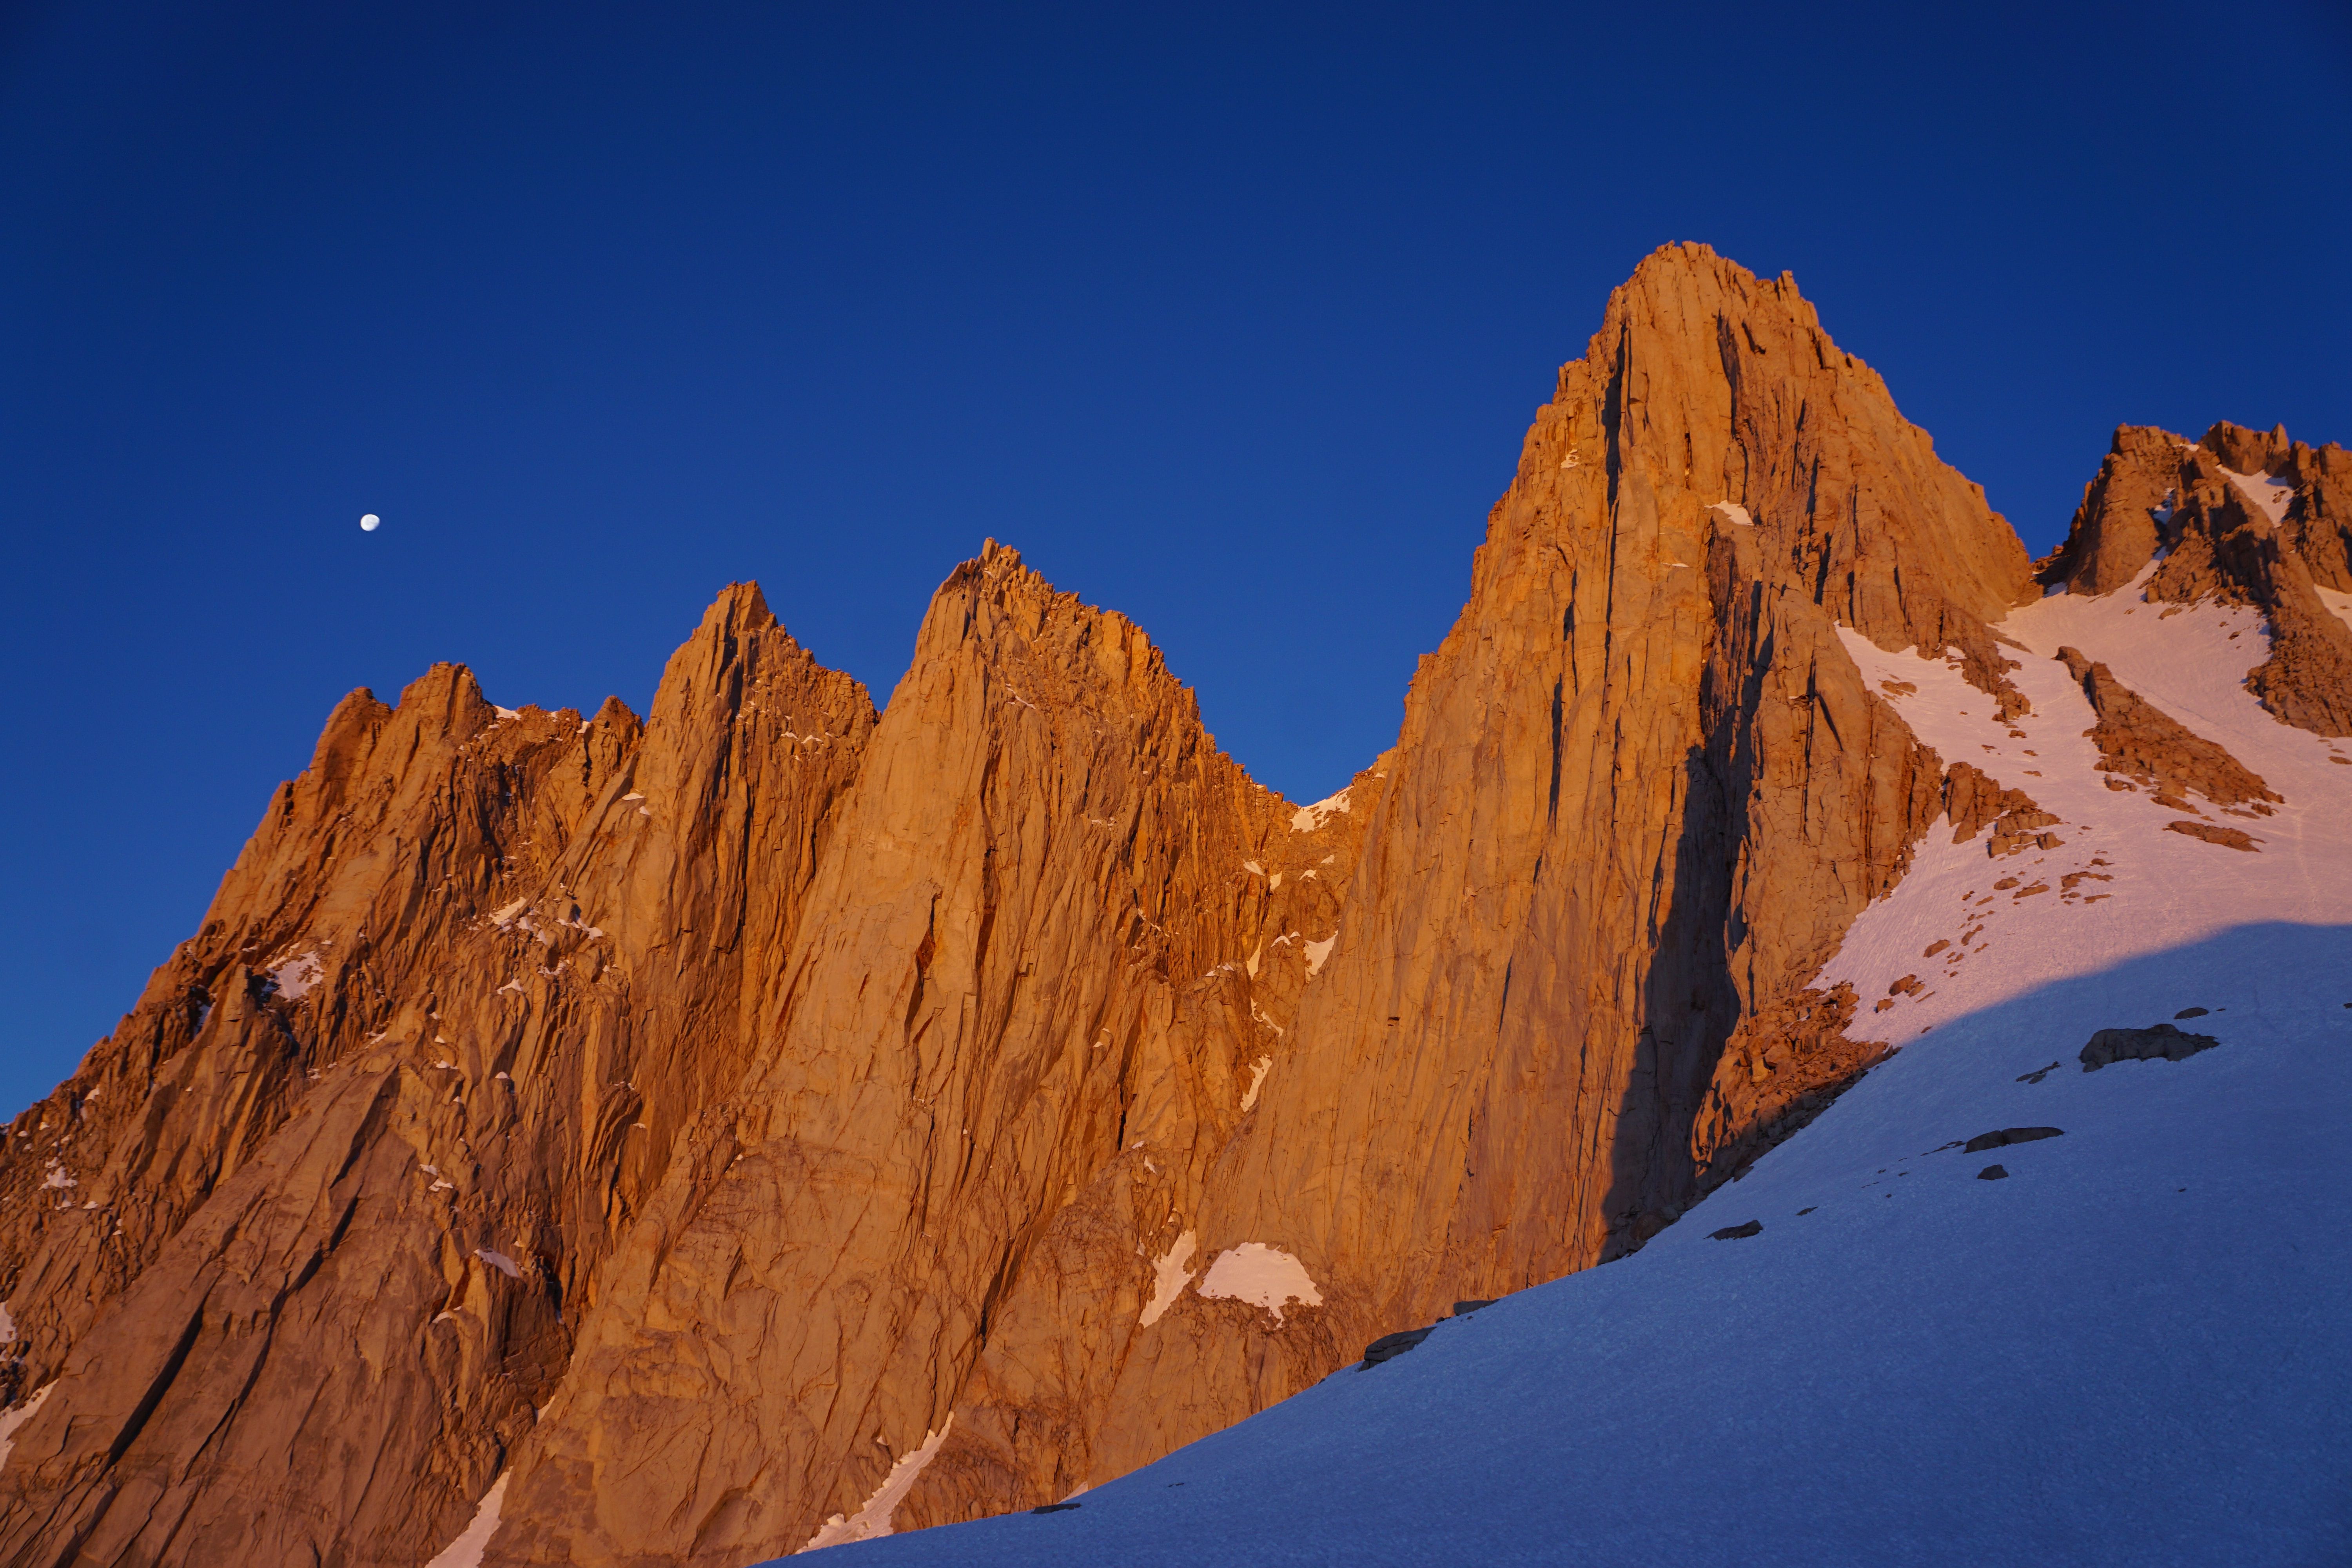 Mount Whitney in Sequoia National Park